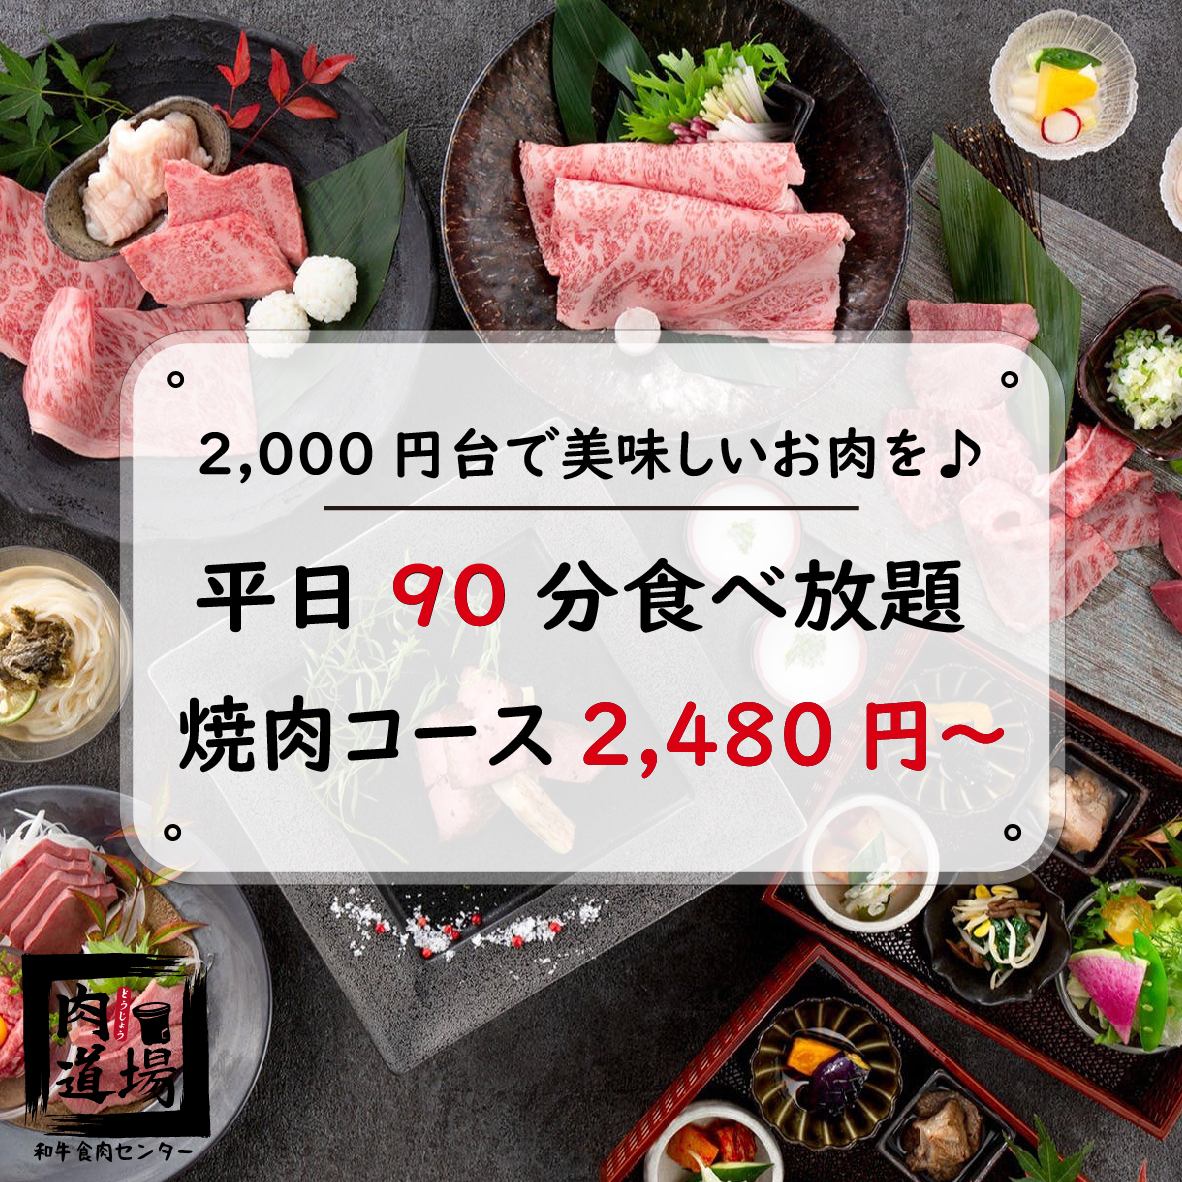 3 minutes from Omiya station ★ All-you-can-eat yakiniku course available from 2480 yen ♪